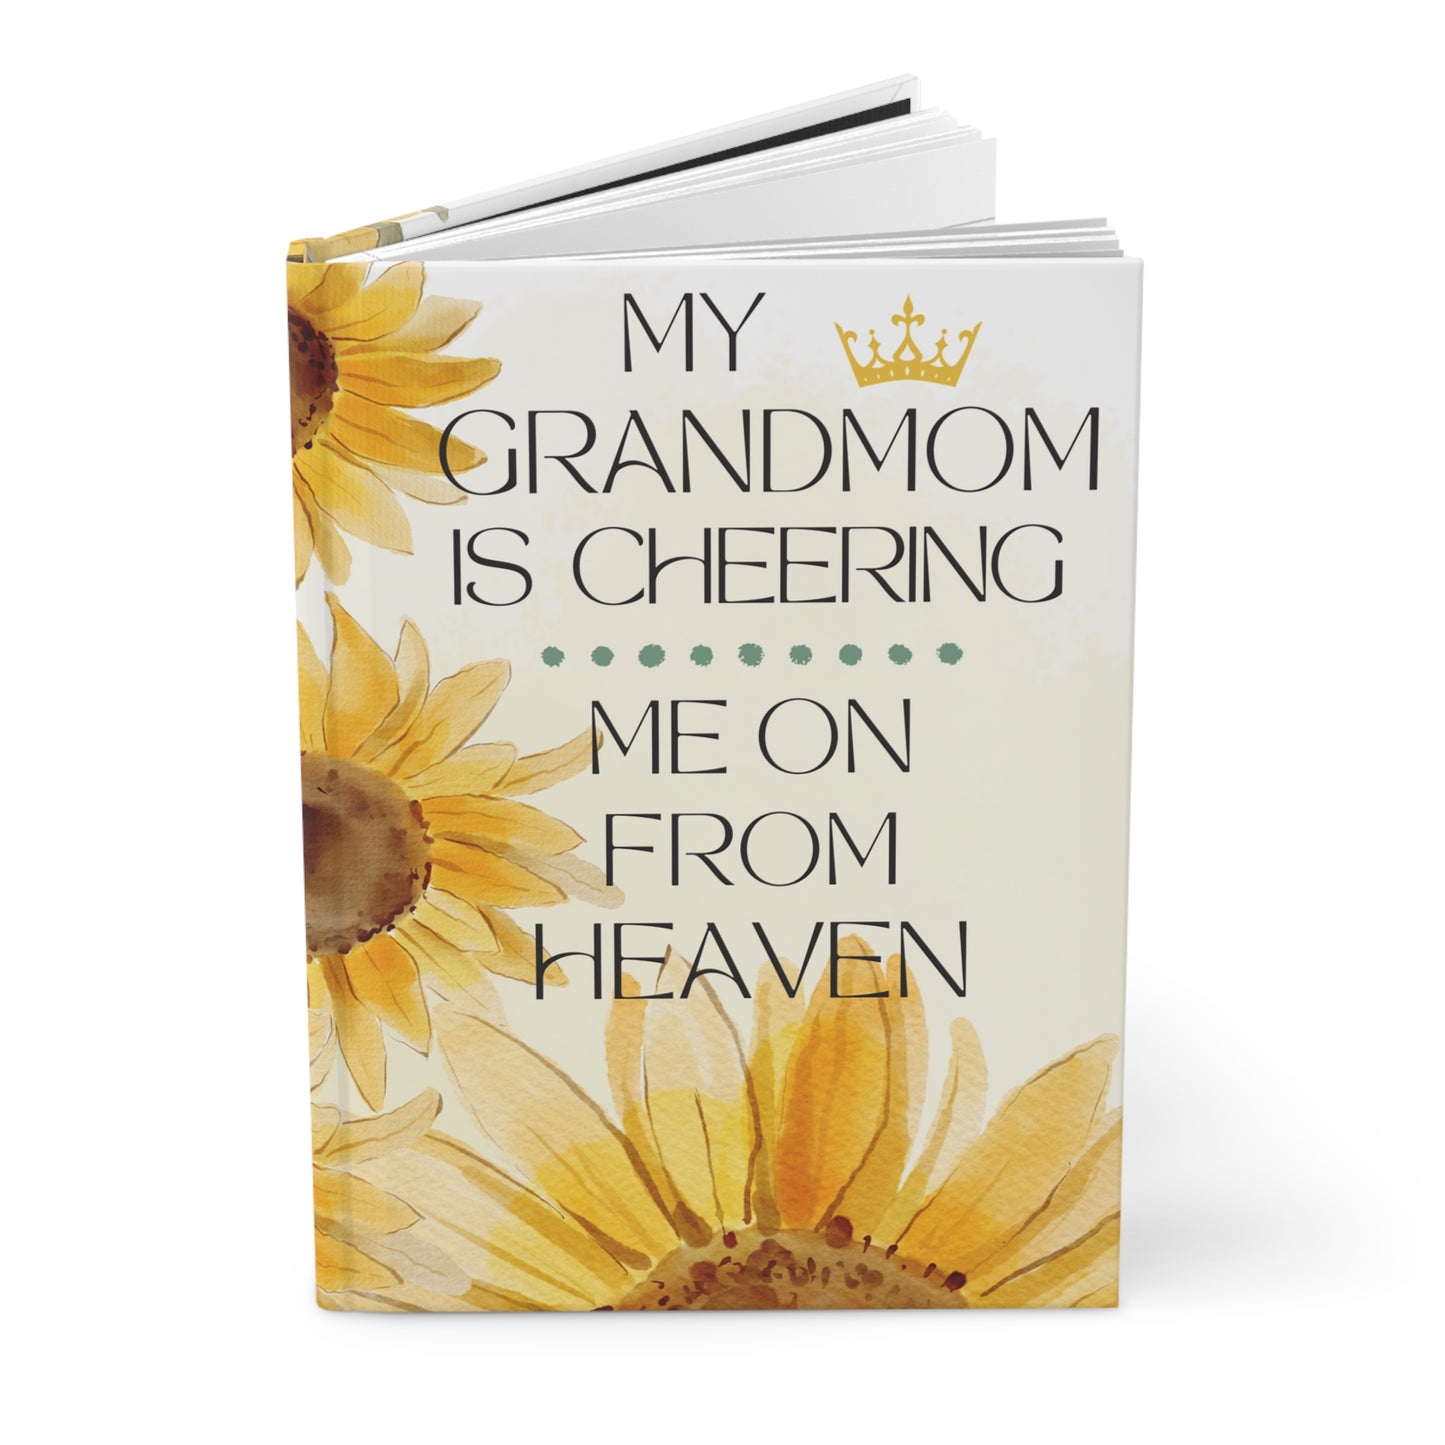 Grief Journal for Loss of Grandmom, Cheering Me On From Heaven